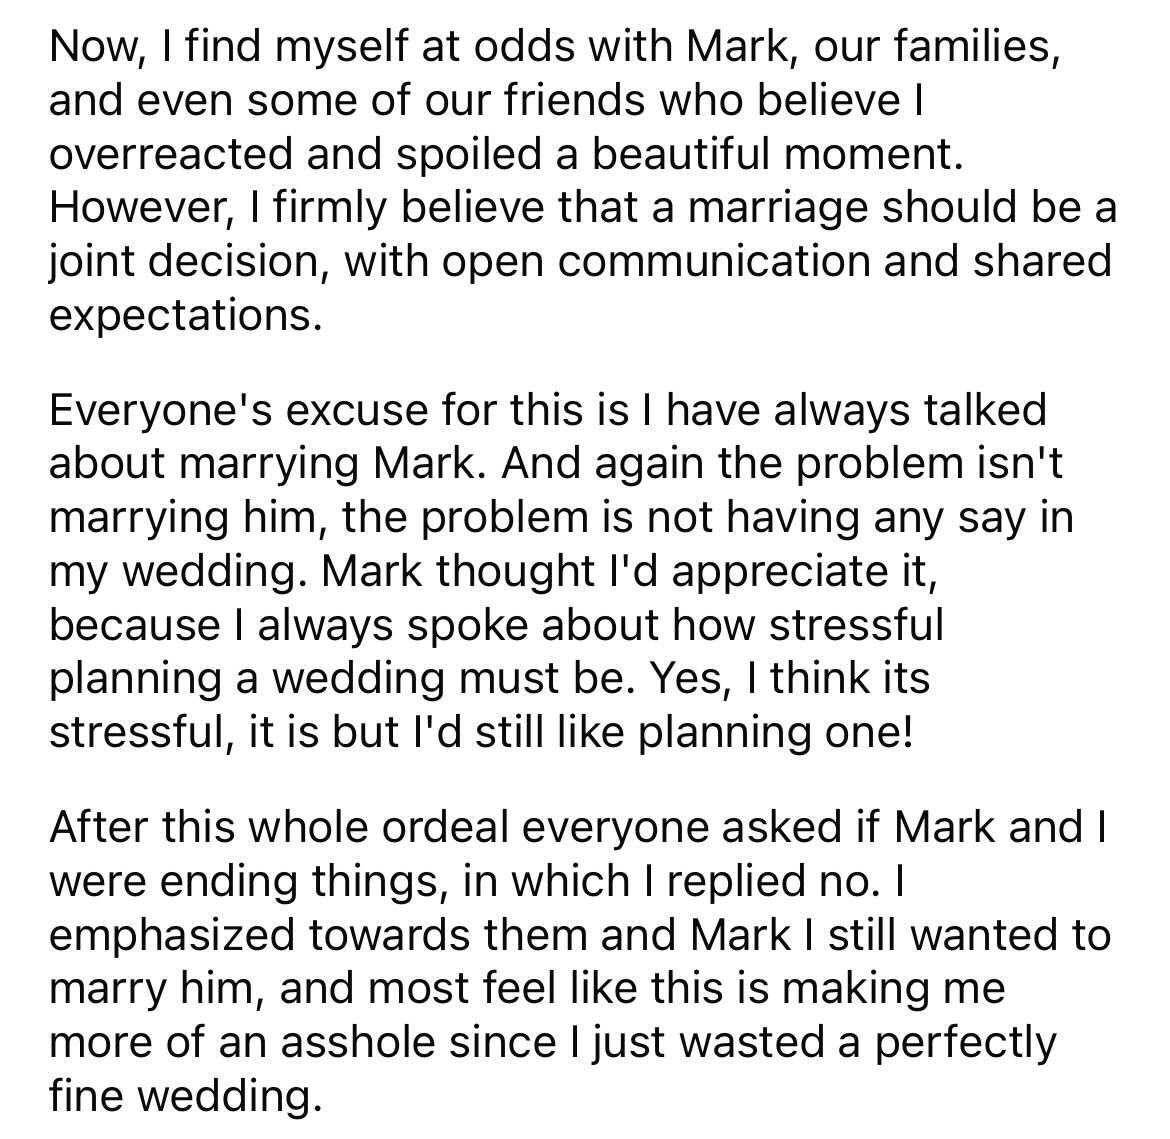 am i the asshole thread on reddit - tell me about a time you had - Now, I find myself at odds with Mark, our families, and even some of our friends who believe I overreacted and spoiled a beautiful moment. However, I firmly believe that a marriage should 